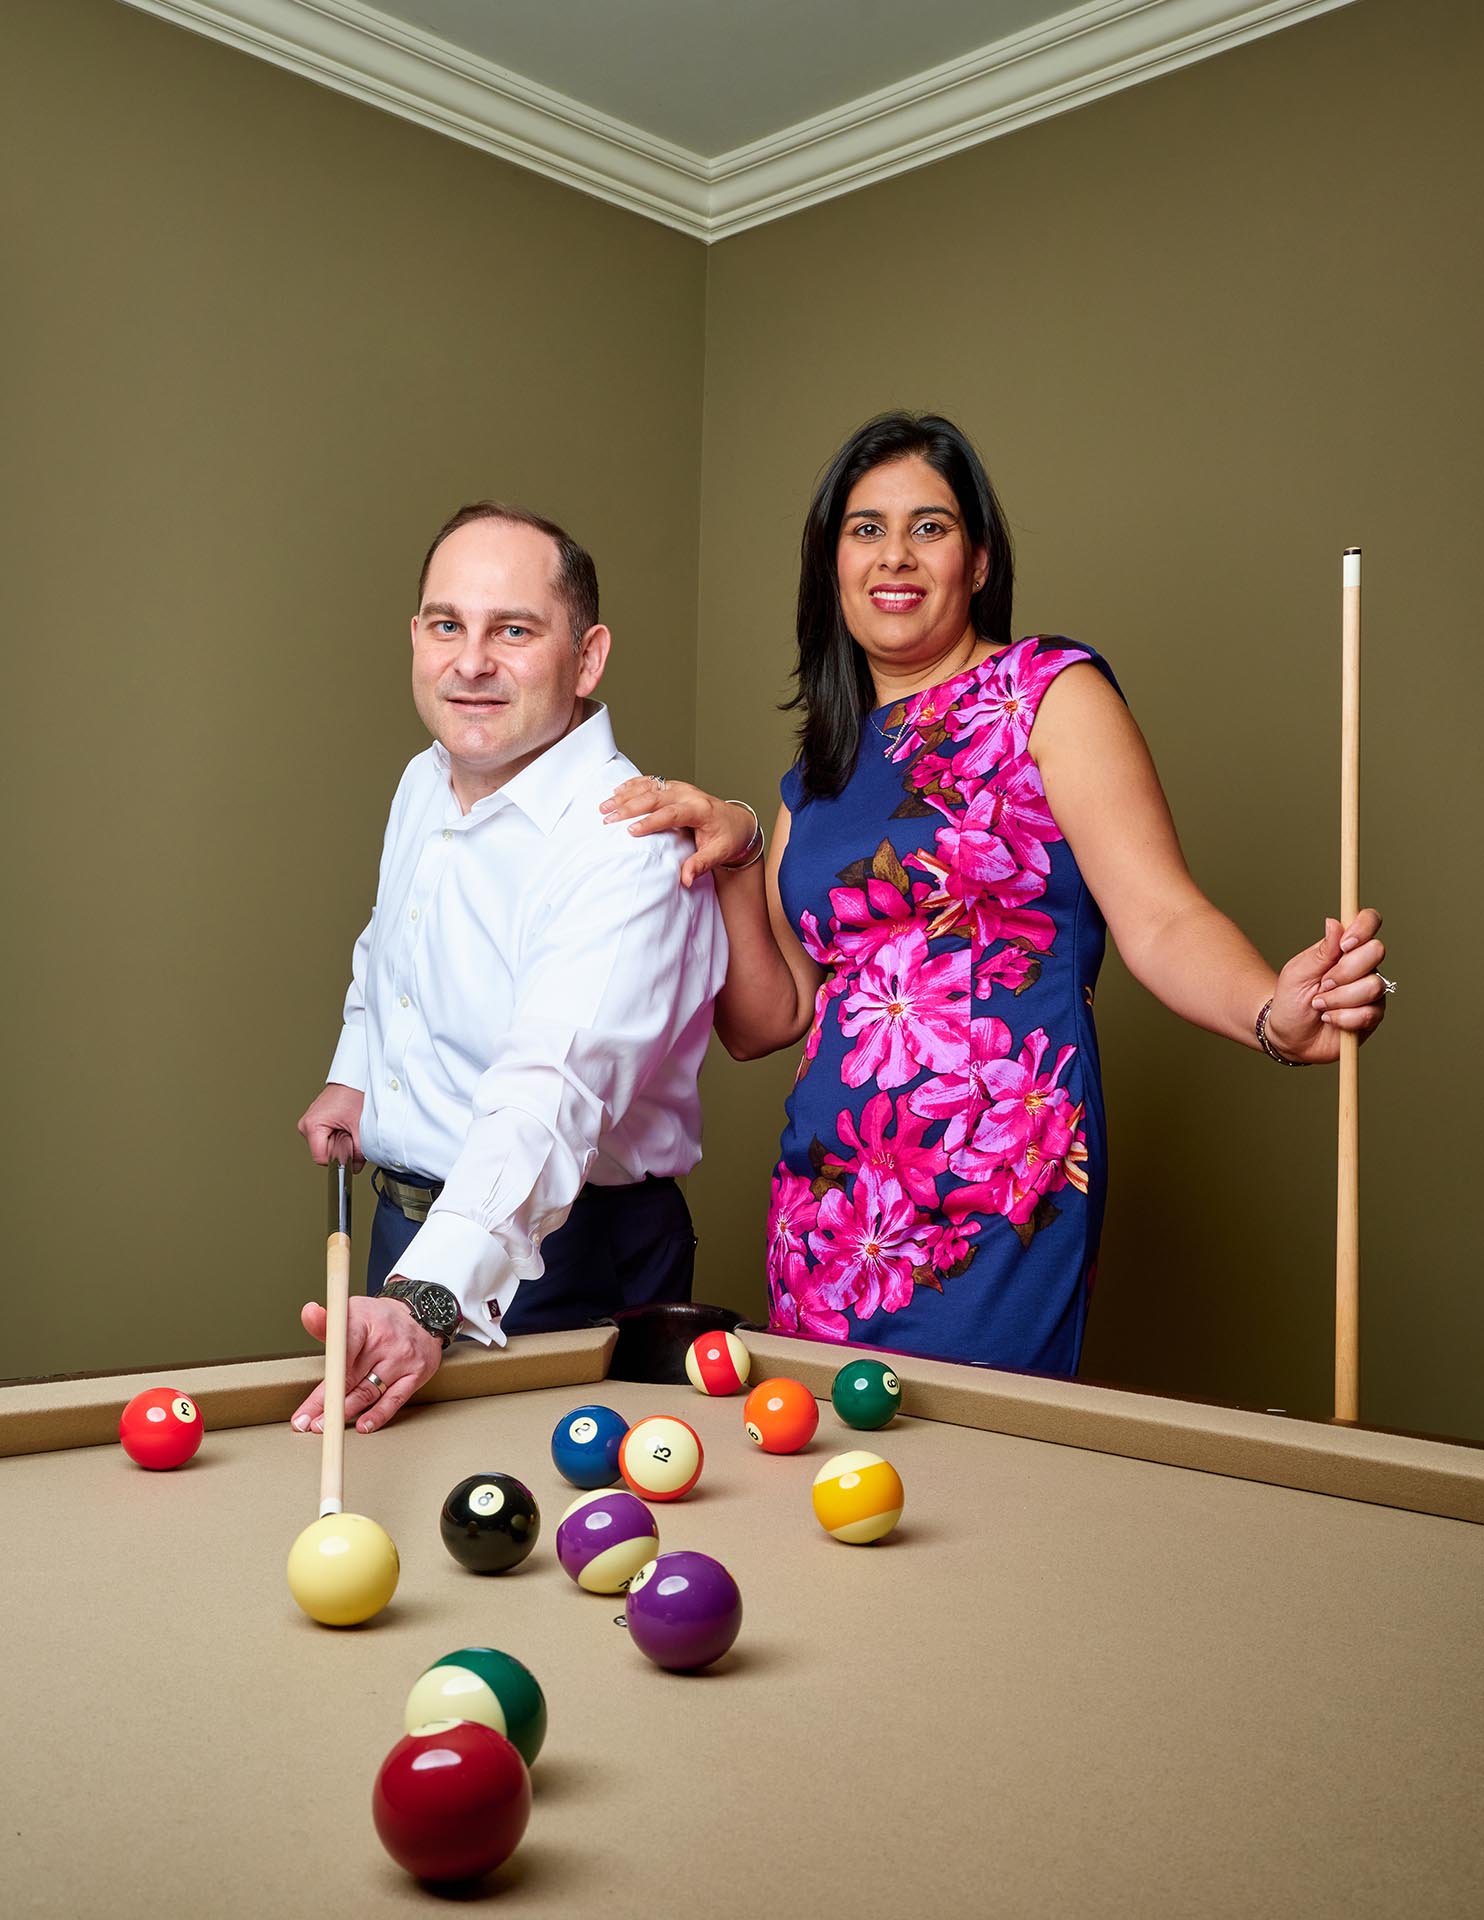 Couple poses for a photo at their billiards table